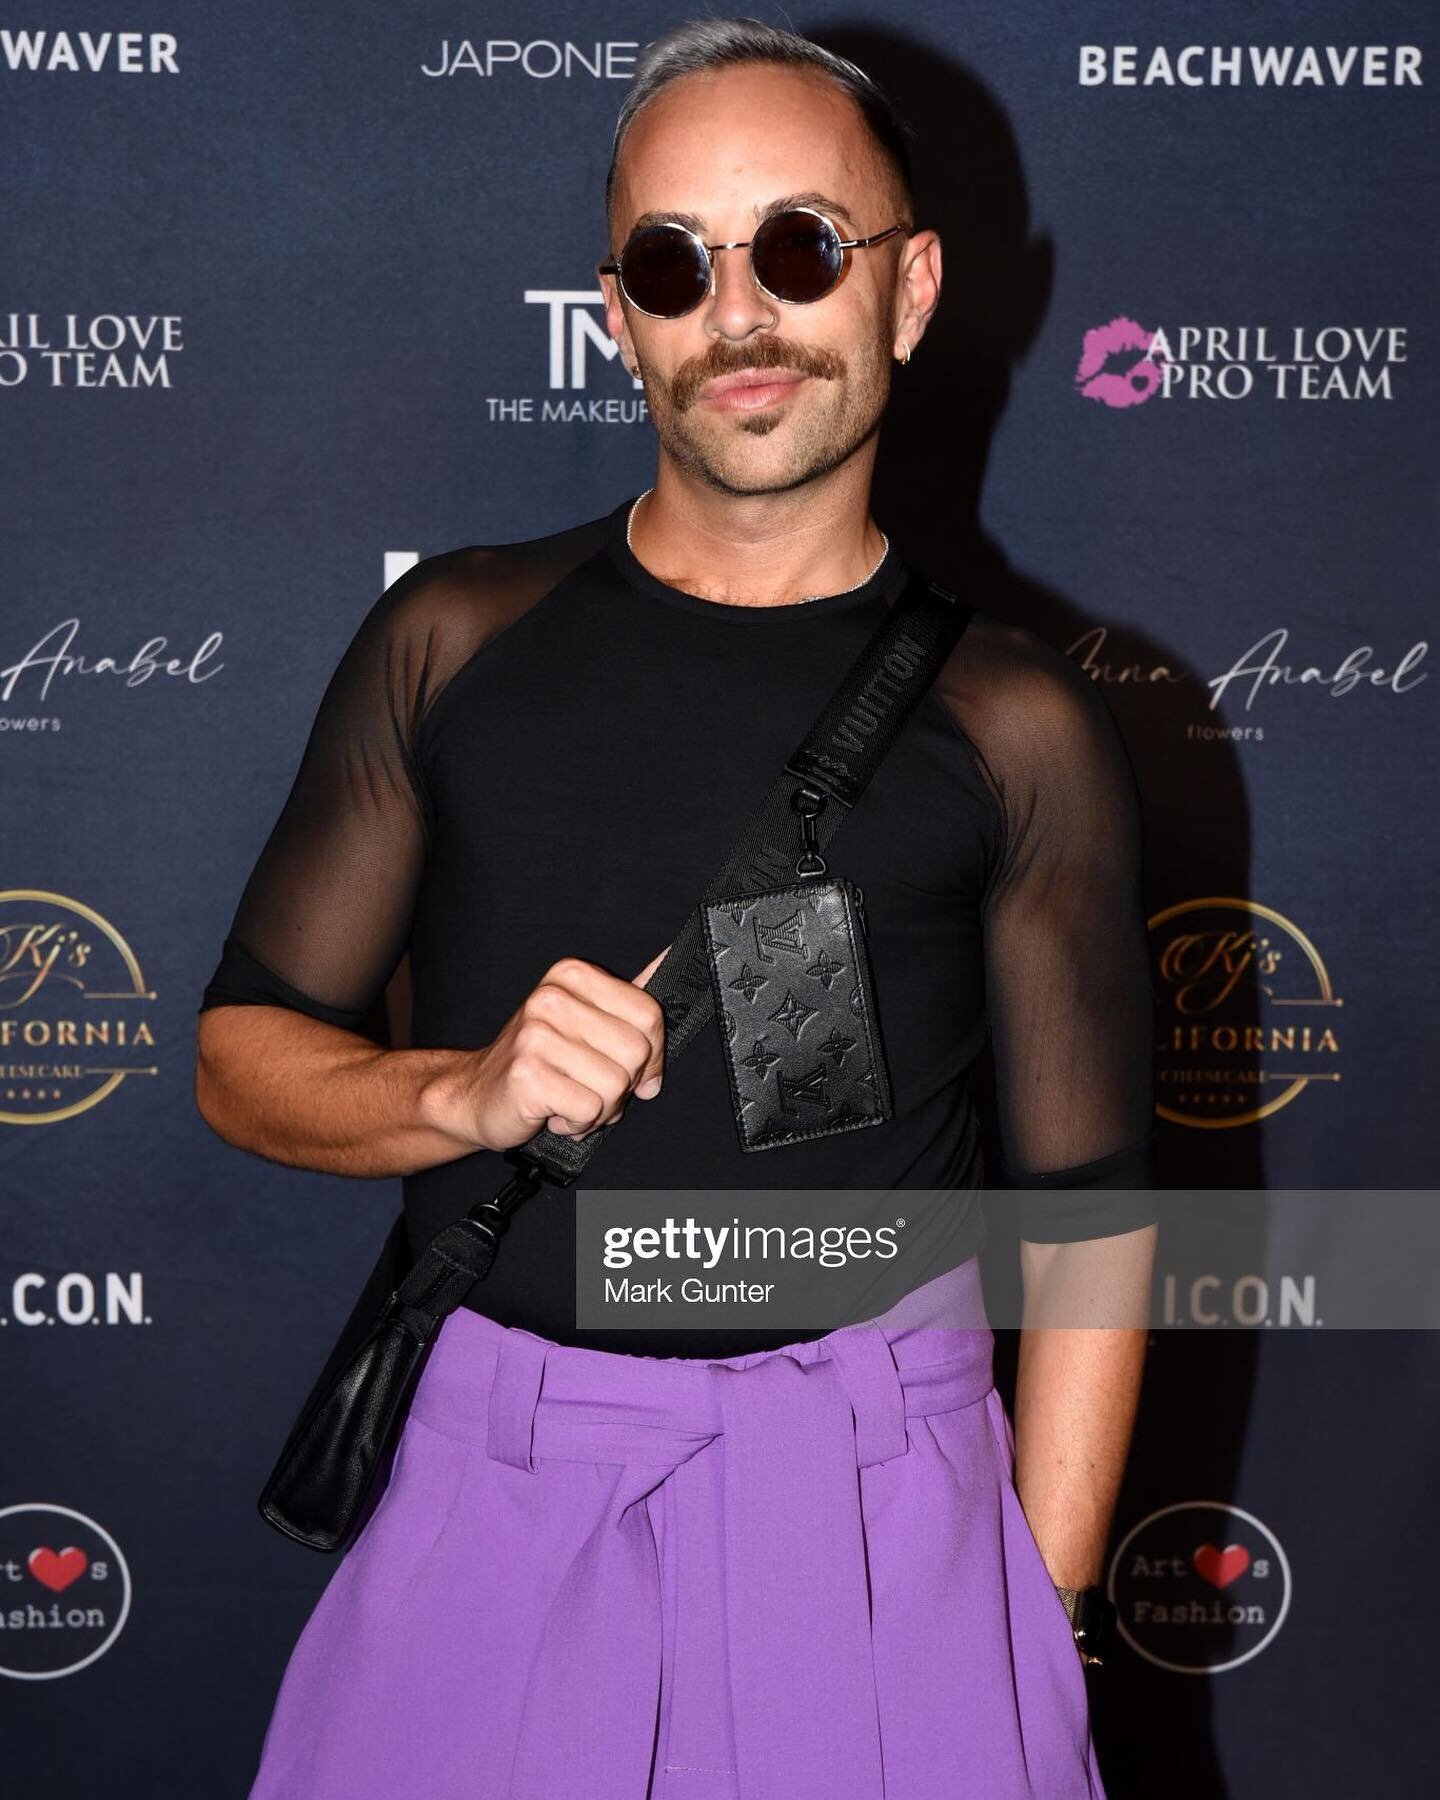 Getty ready with me 😜 some of my lewks from last week&rsquo;s @artheartsfashion #lafw runway events. Which one is your favorite?
💜🖤🤍💖

#gayguu #gay #gayfashion #fashionblogger #fashioninfluencer #gayinfluencer #gaymiami #gayla #fashionpr #fashio